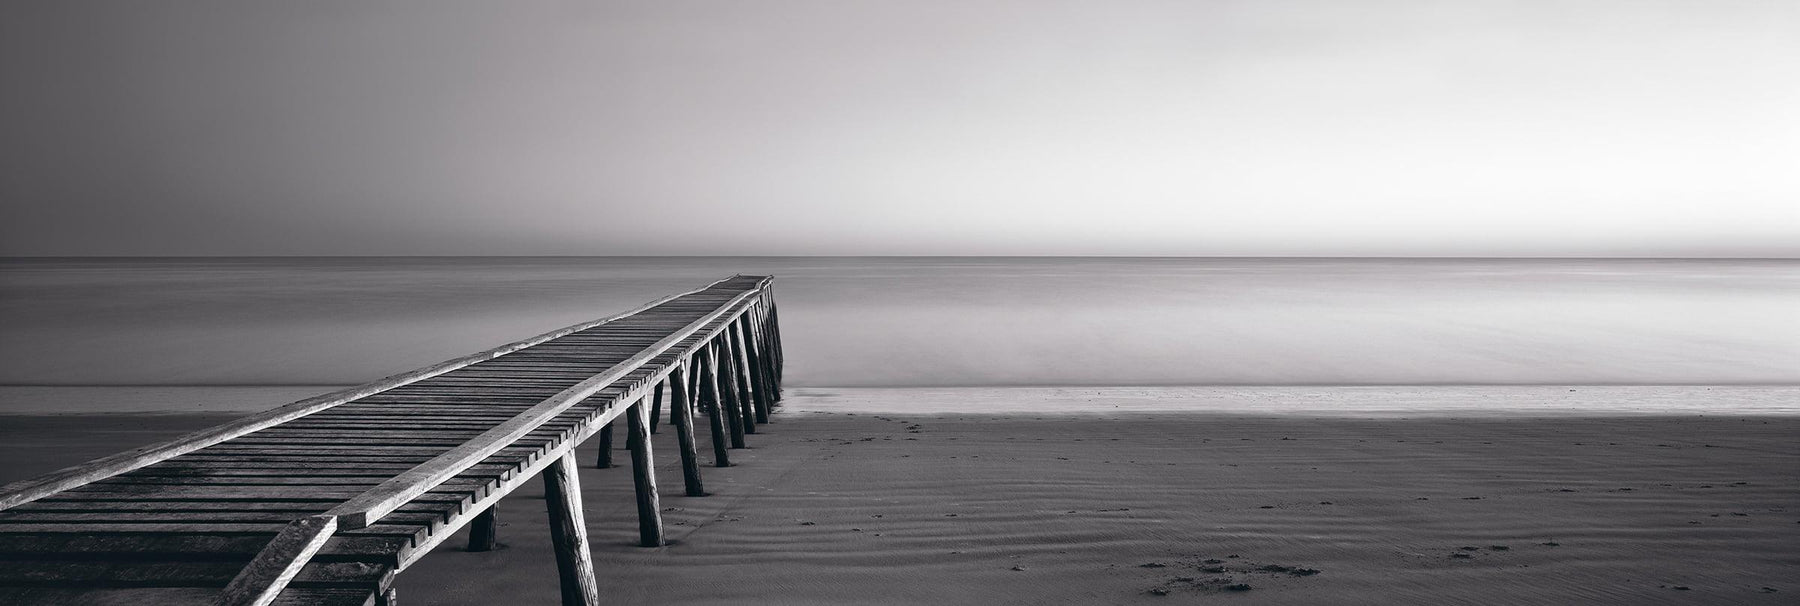 Black and white old wooden jetty leading across the sandy beach and into the ocean in Queensland Australia